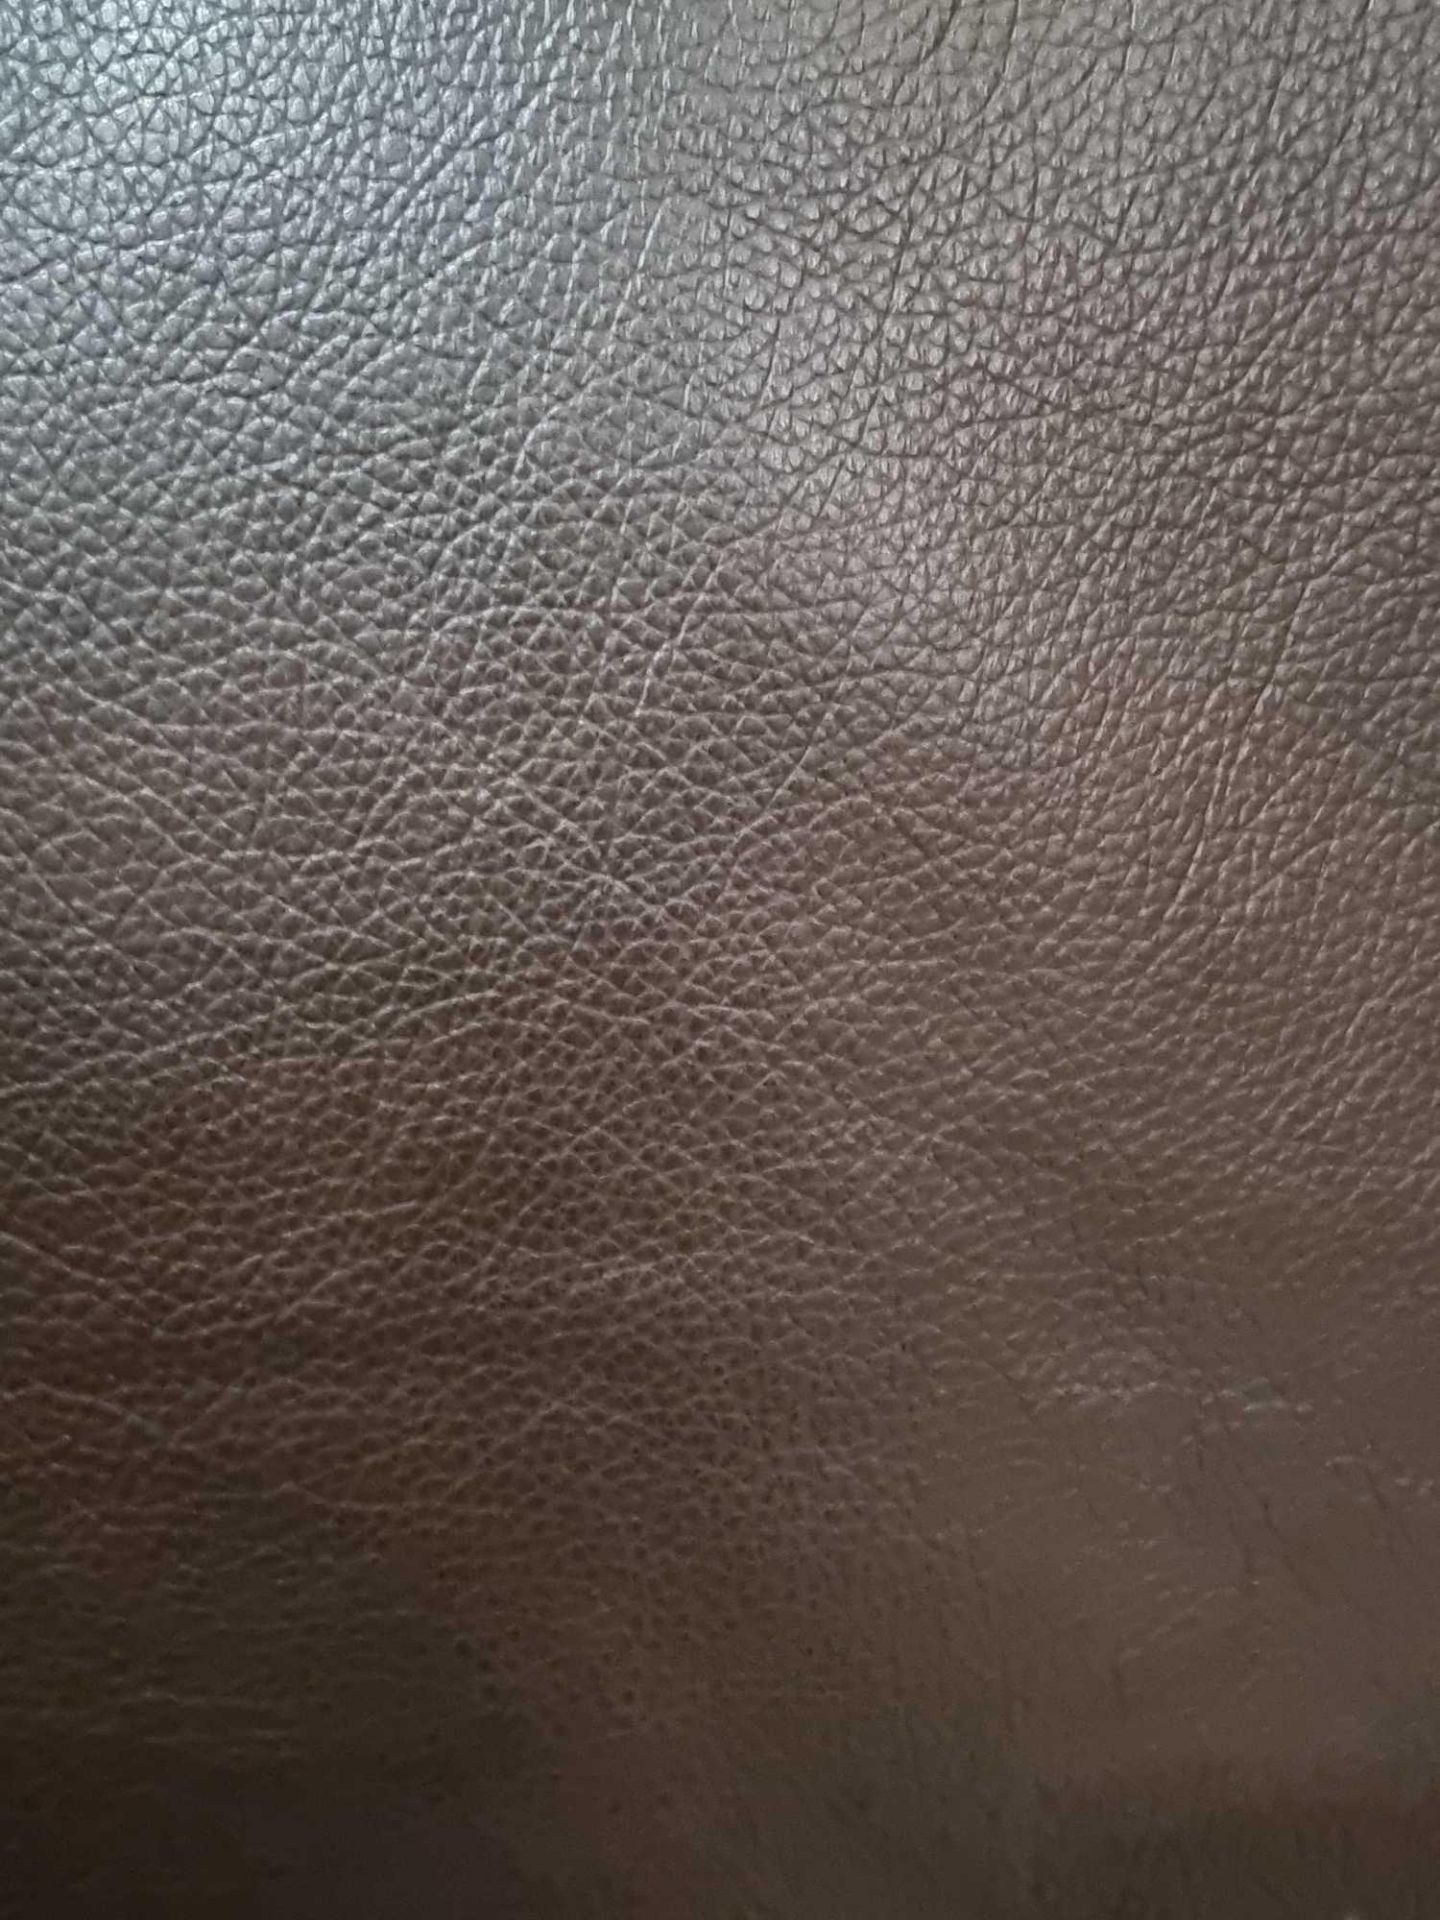 Chocolate Leather Hide approximately 2 72M2 1 7 x 1 6cm ( Hide No,138)